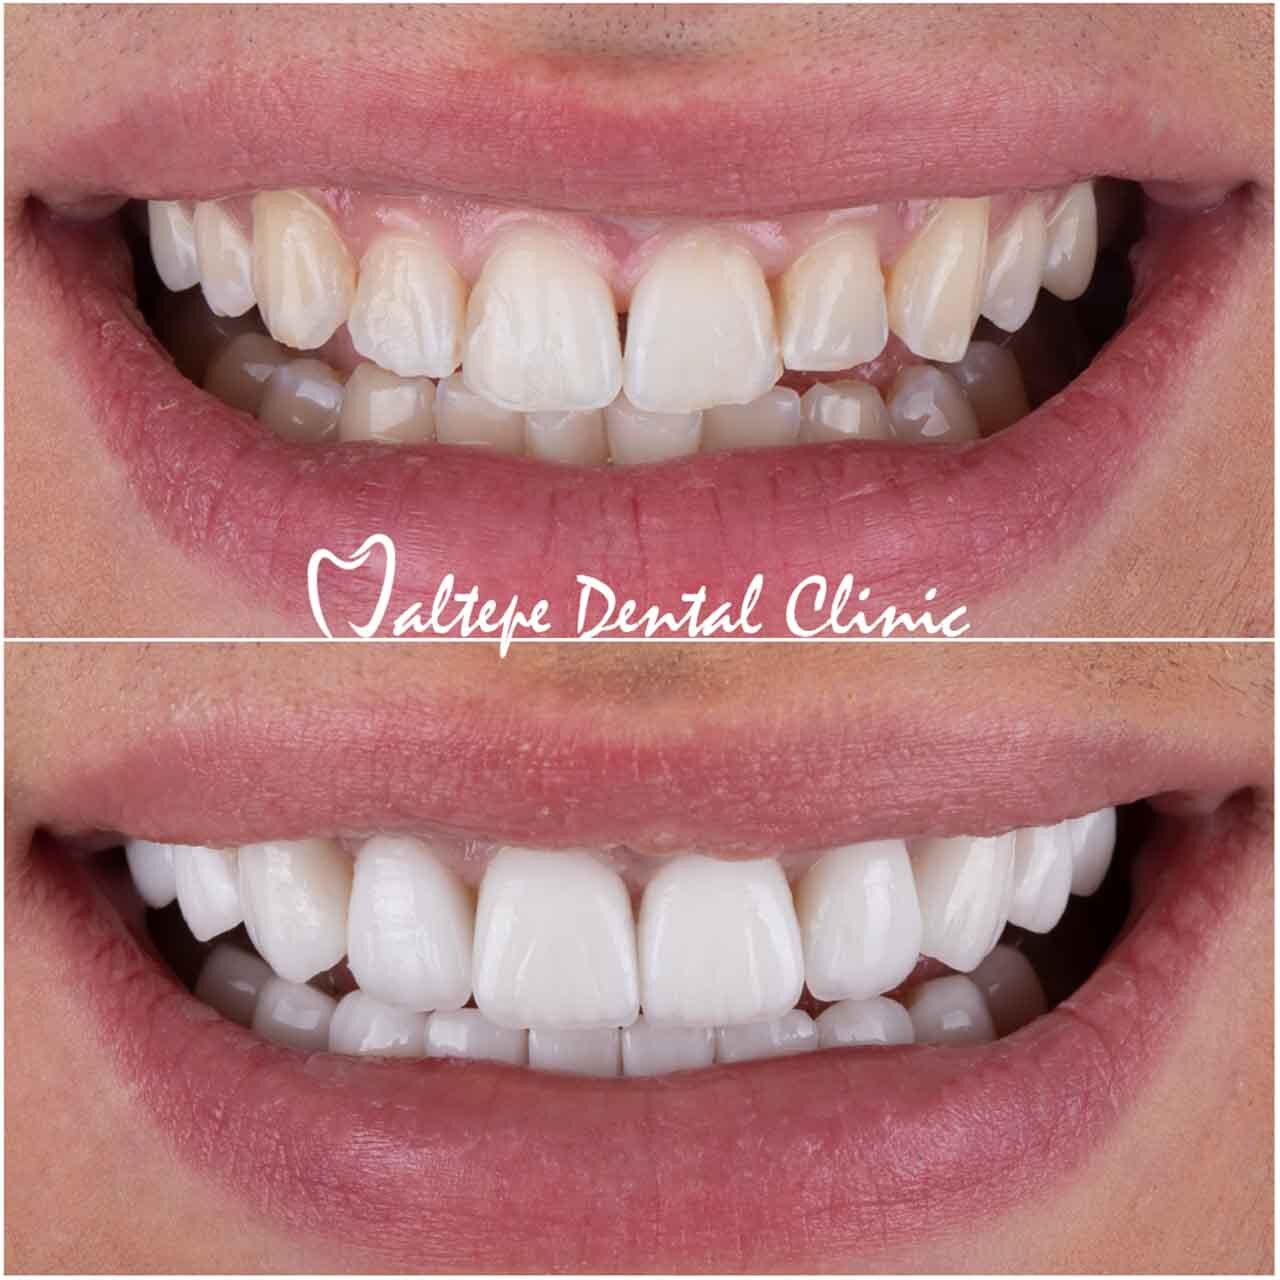 veneer treatment before after images